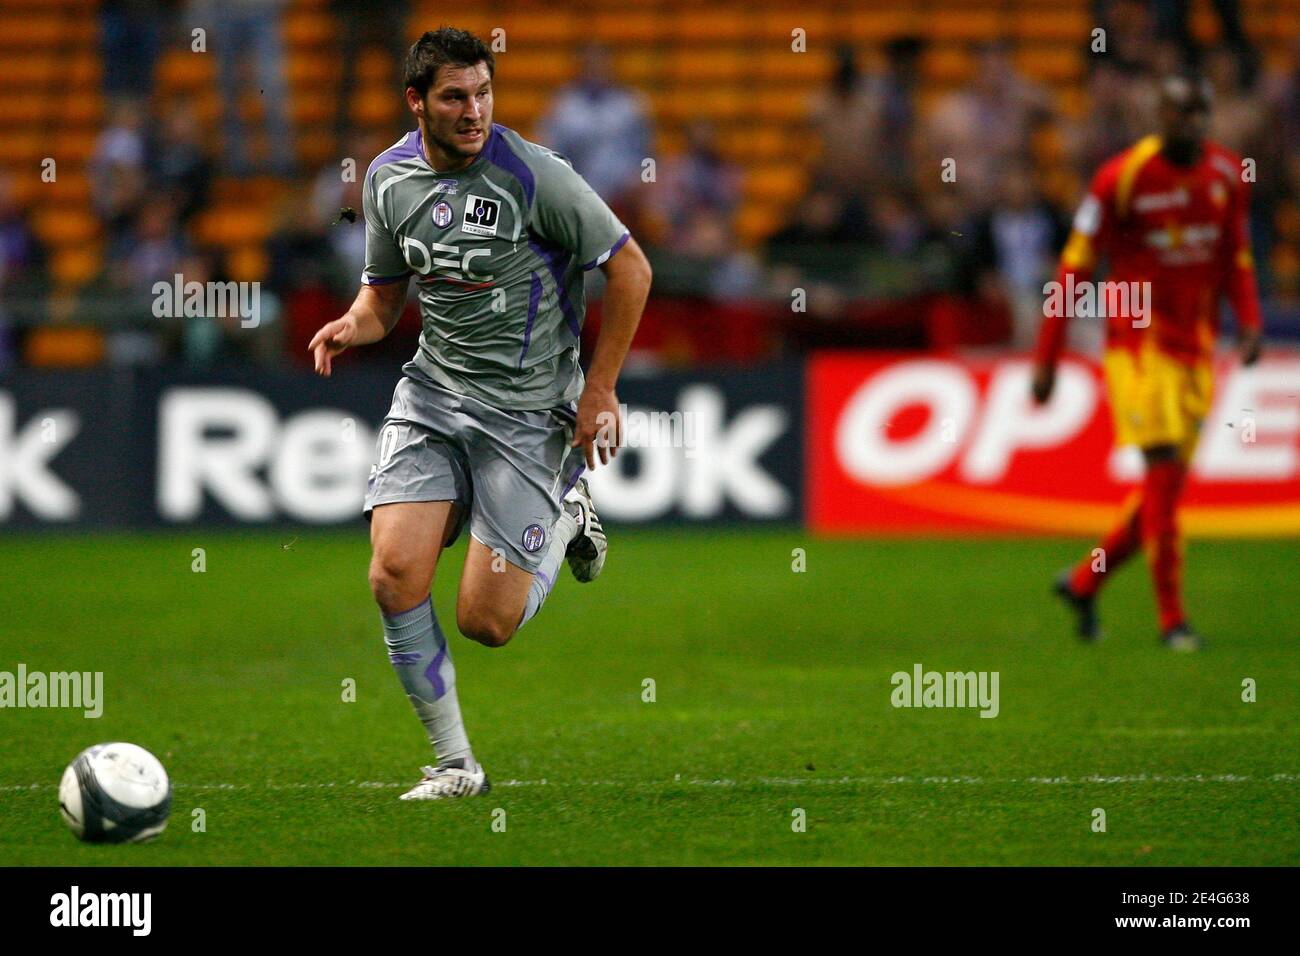 Toulouse's Andre-Pierre Gignac during the French First League Soccer match,  Racing Club de Lens (RCL) vs Toulouse Football Club (TFC) at Felix Bollaert  Stadium in Lens, France, on october 25, 2009. Toulouse